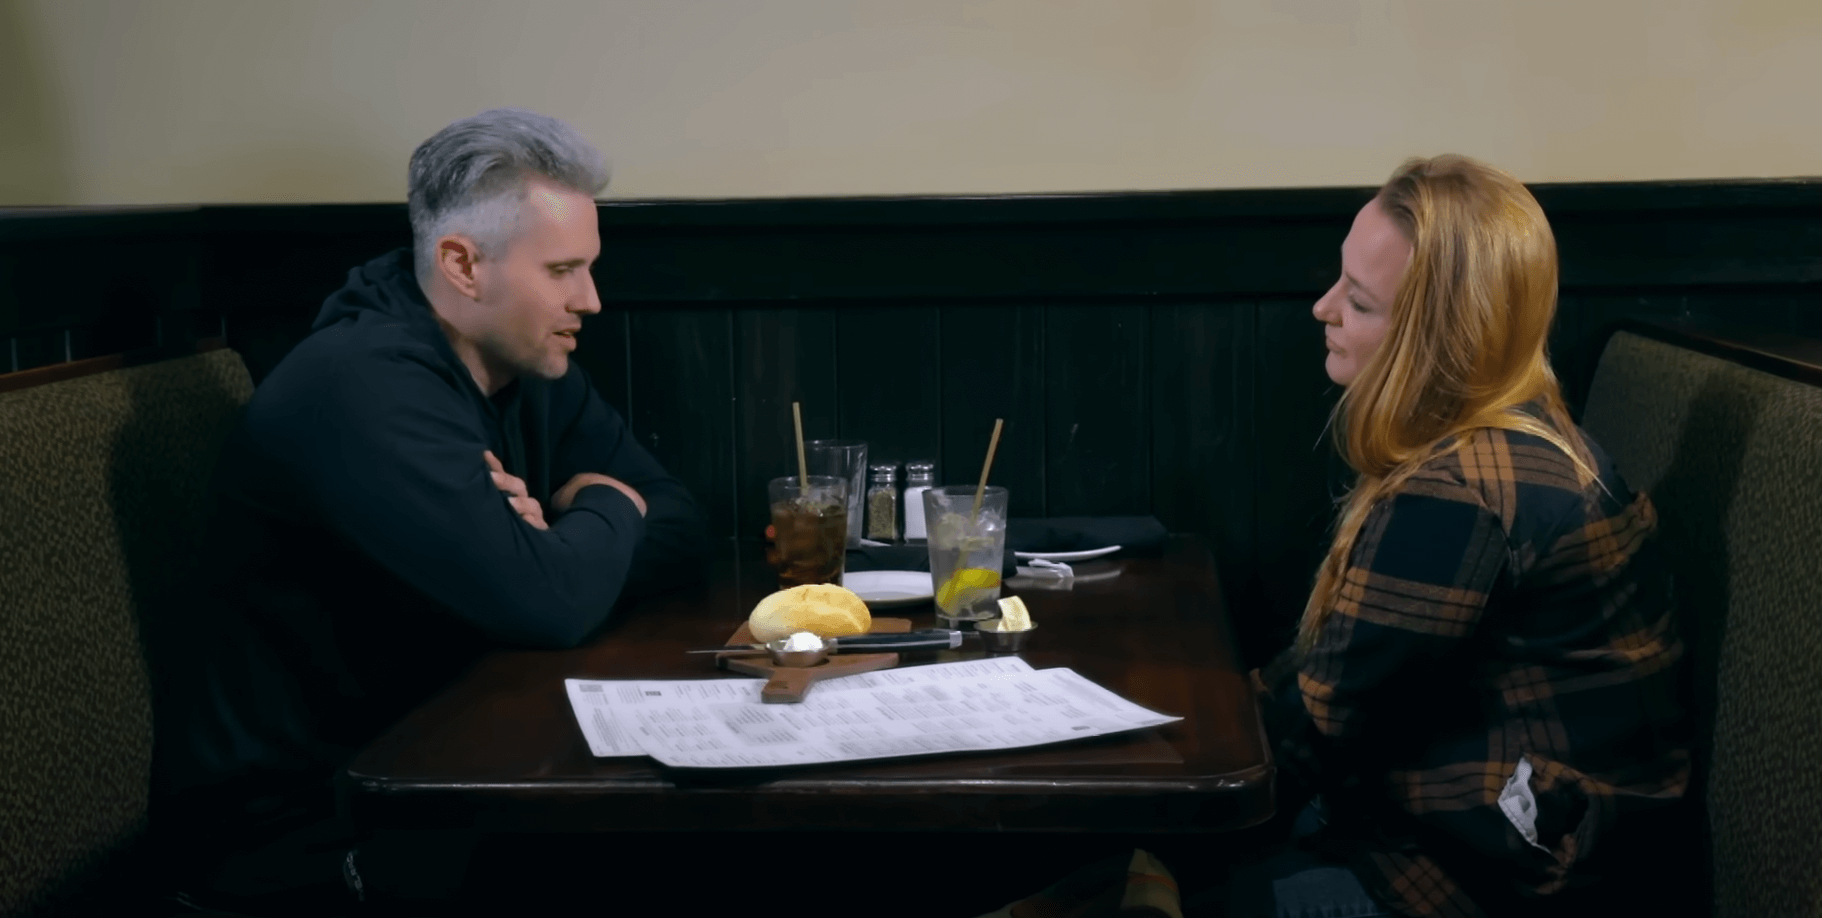 Ryan Edwards and Maci Bookout from 'Teen Mom' talking to each other from across a restaurant table